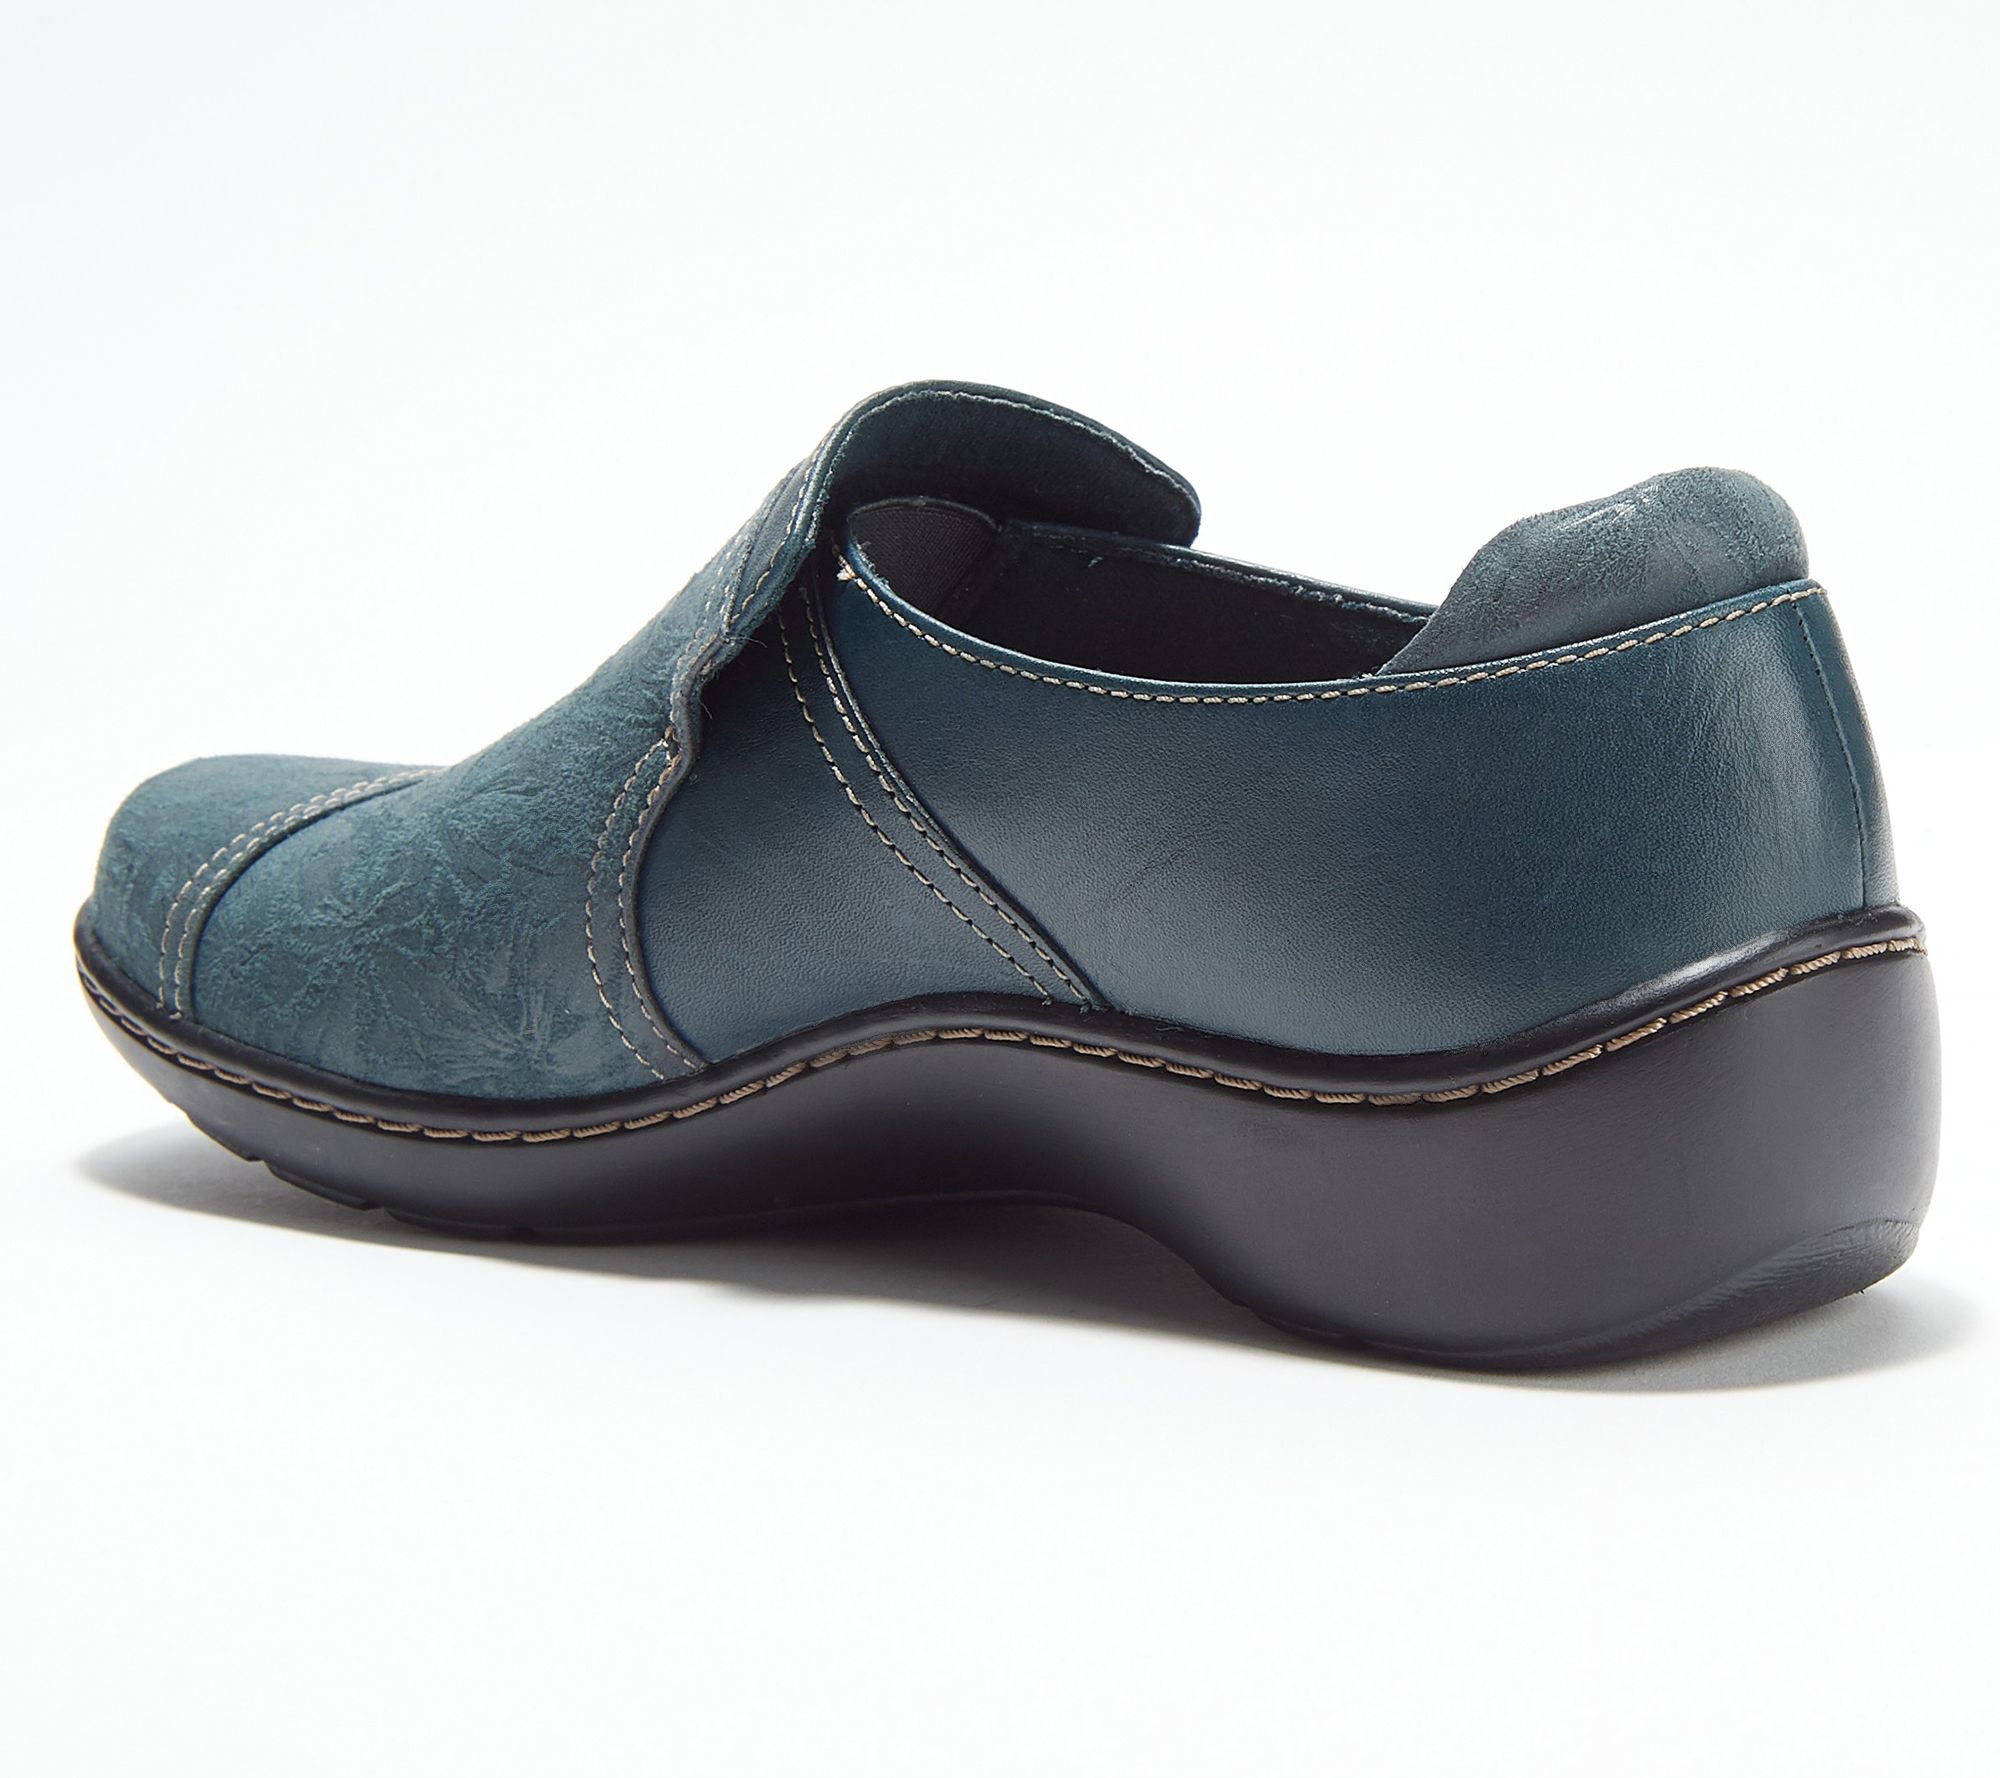 Clarks Collection Leather Slip-On Shoes - Cora Poppy - QVC.com